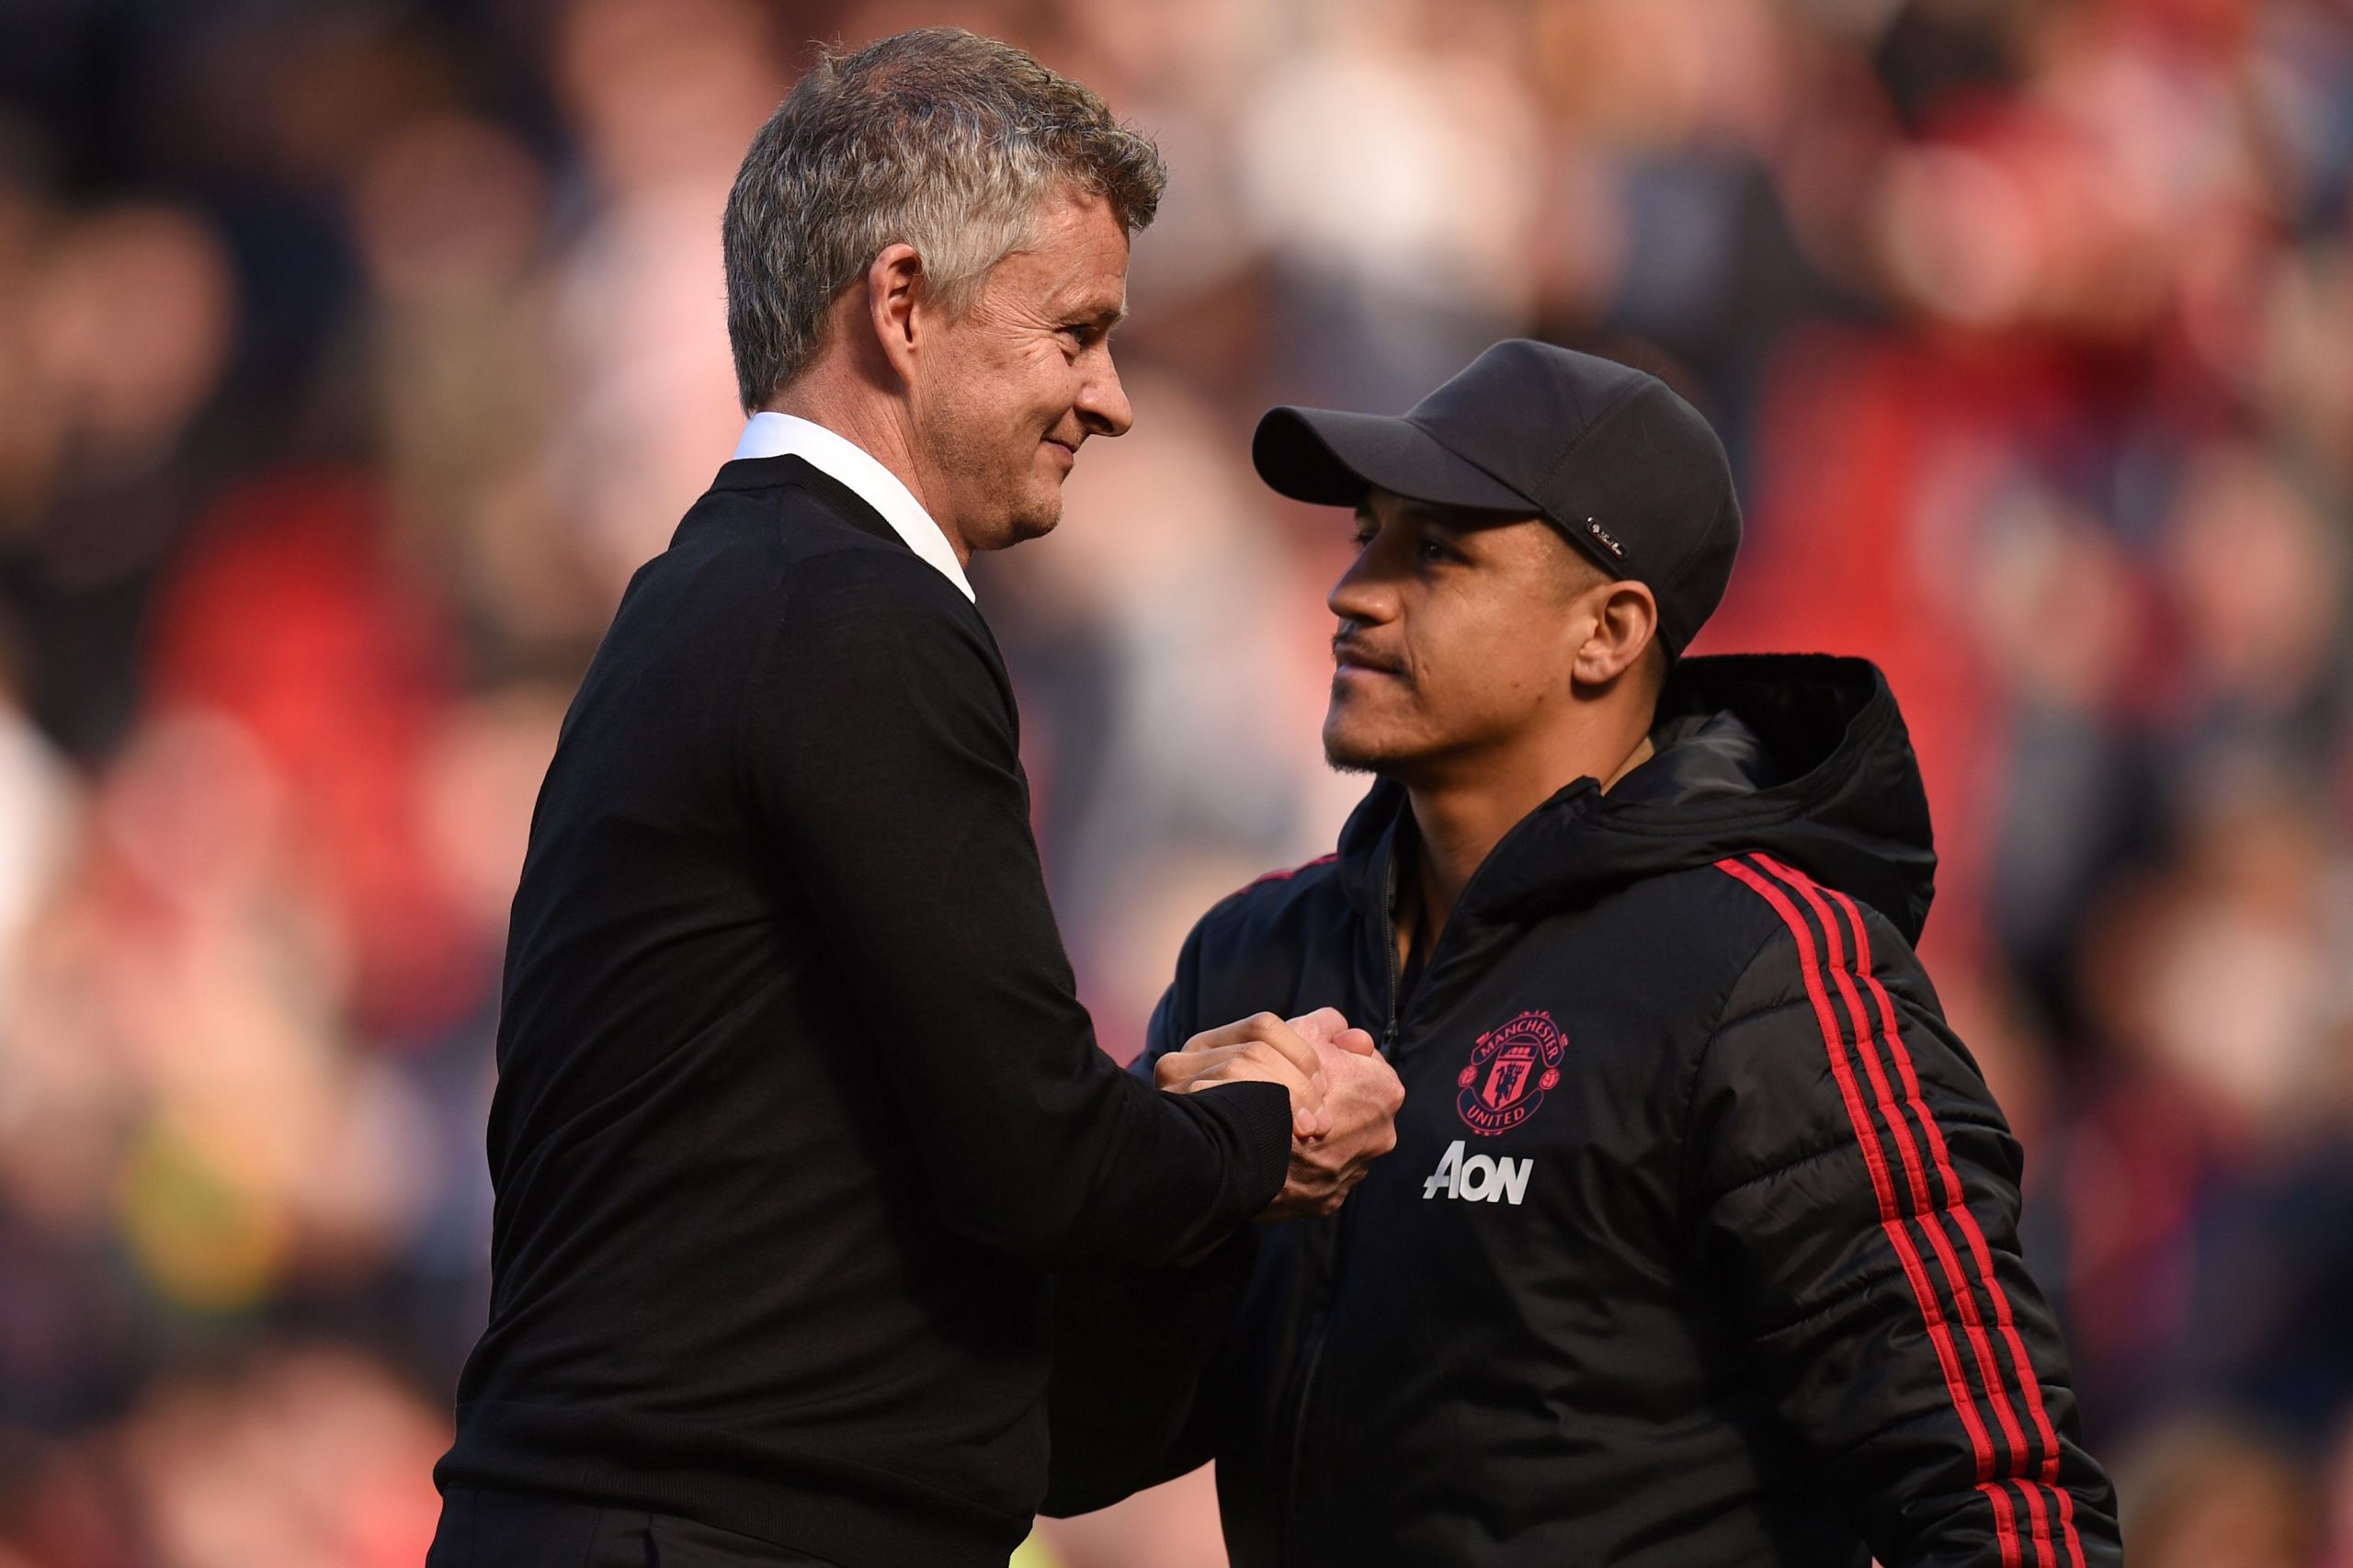 Manchester United's Norwegian manager Ole Gunnar Solskjaer shakes hands with Alexis Sanchez.